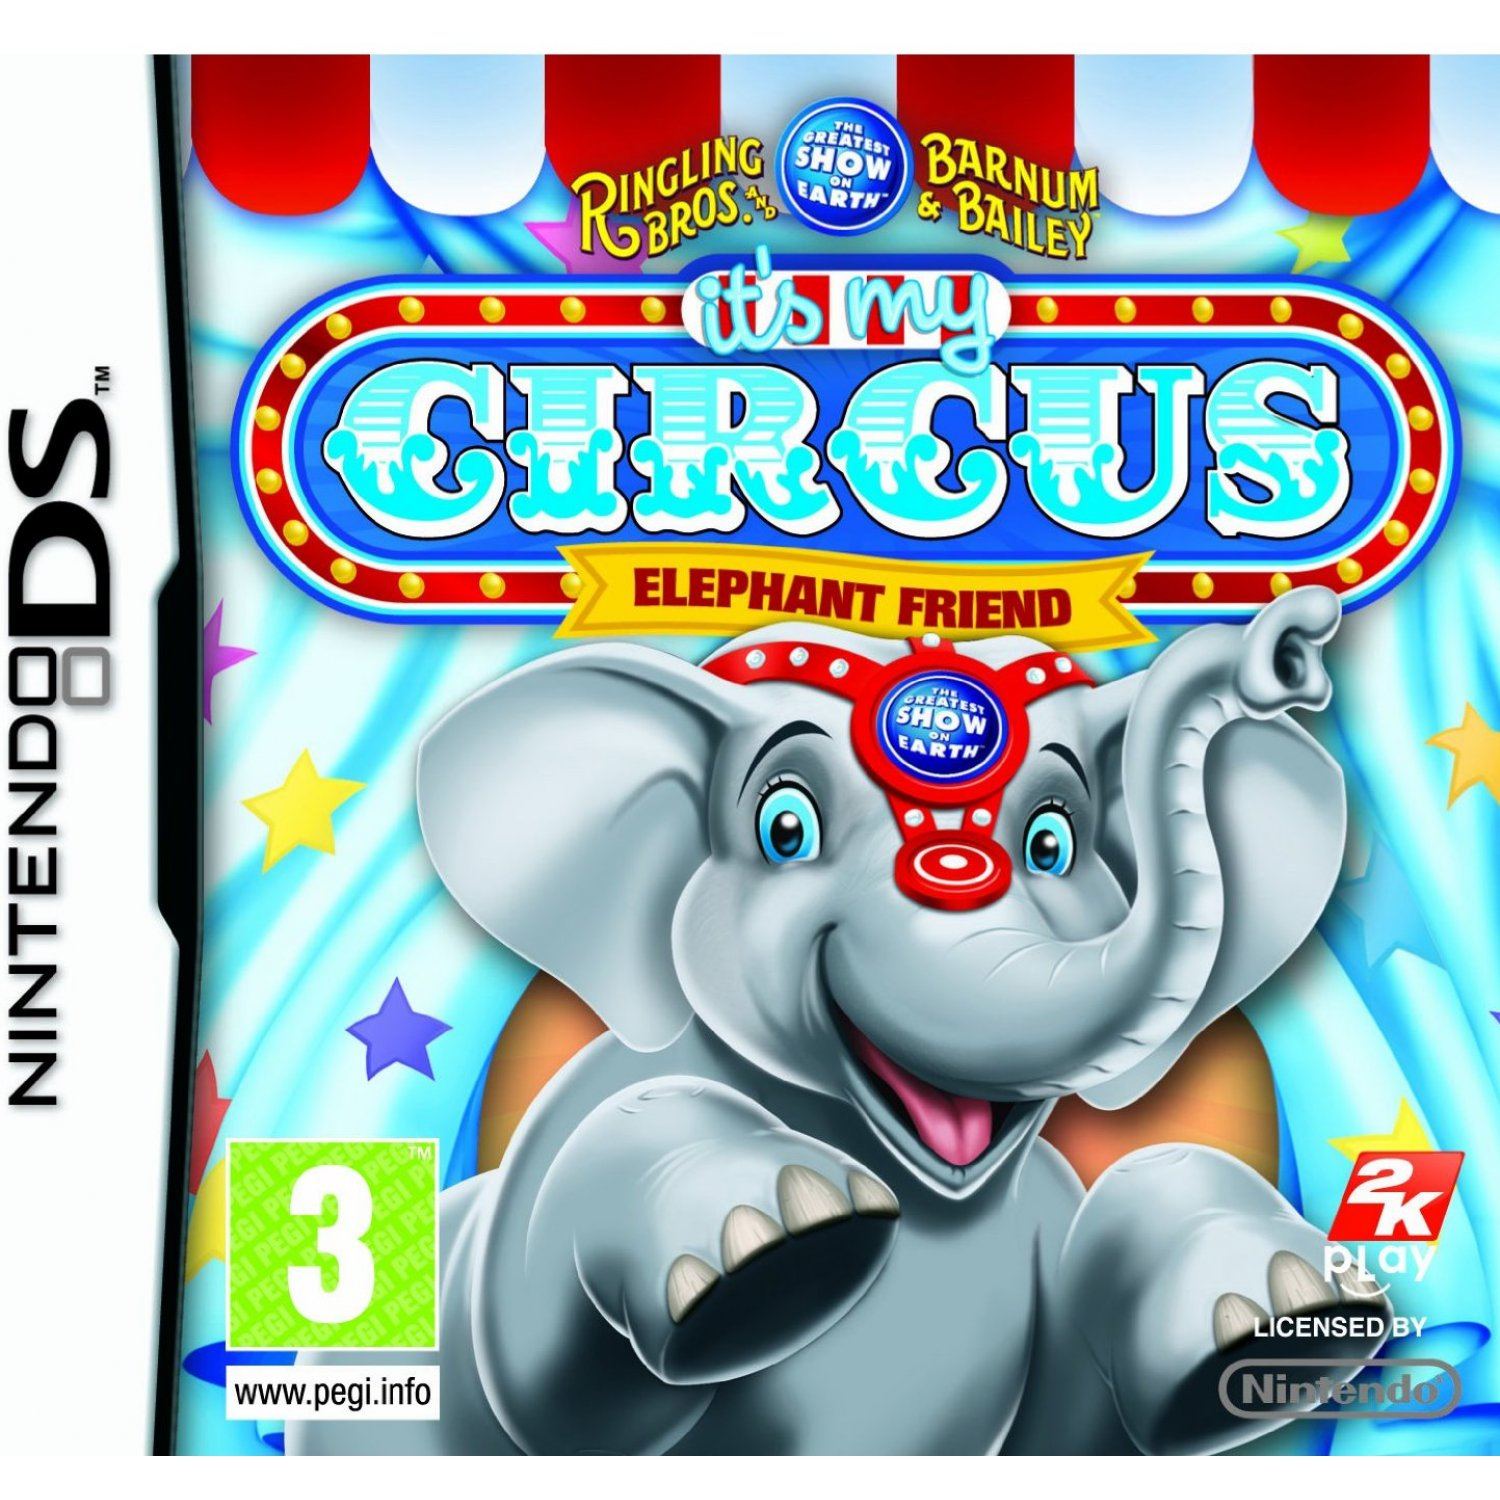 Game | Nintendo DS | It's My Circus Elephant Friend